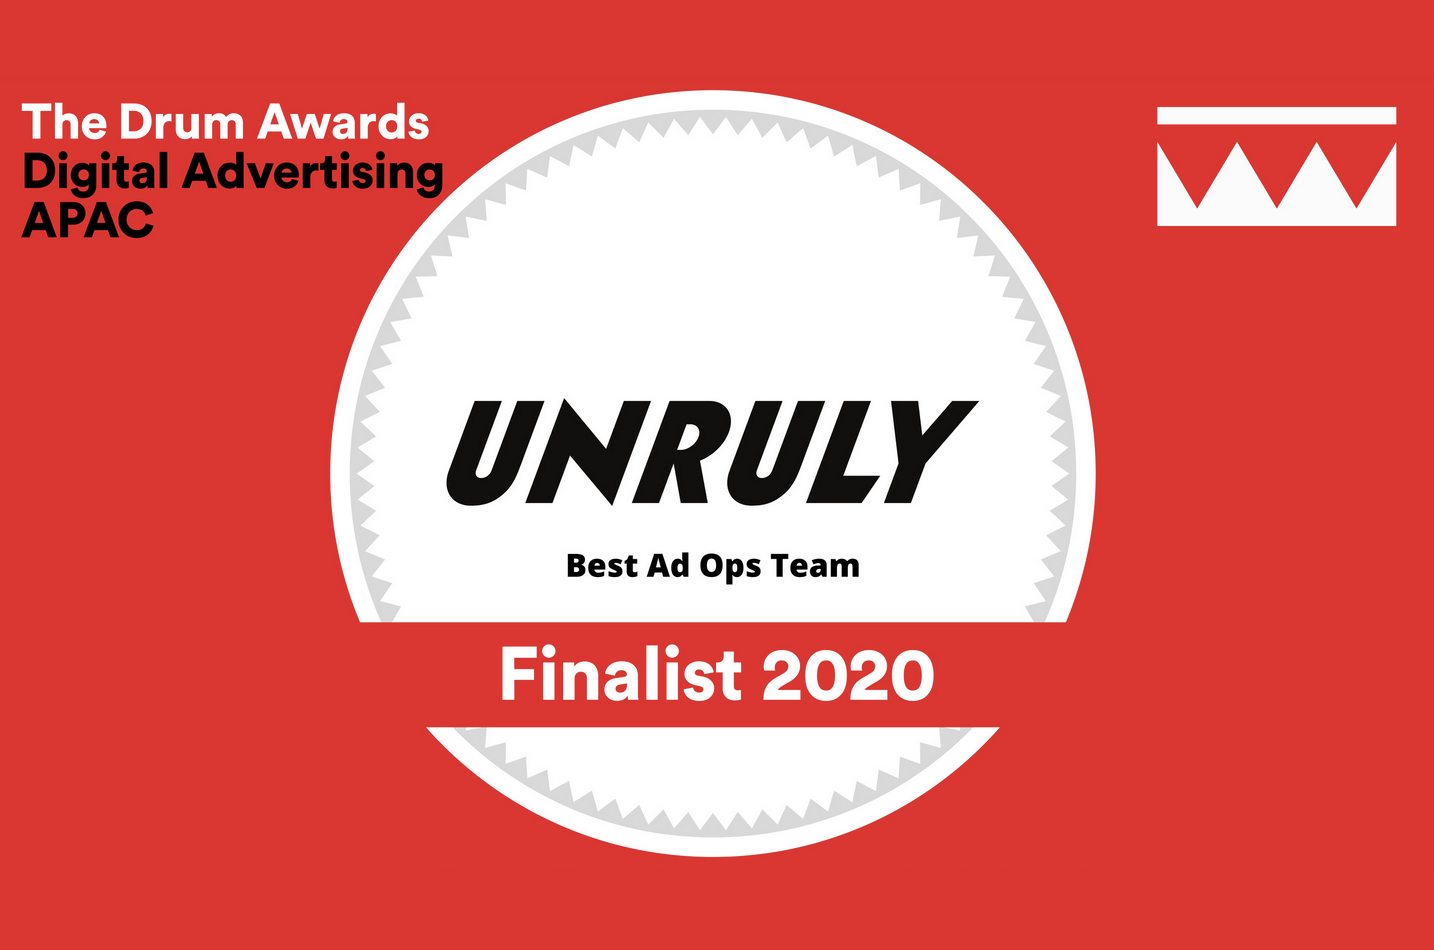 Unruly Nominated for Best Ad Ops Team at The Drum Digital Advertising Awards